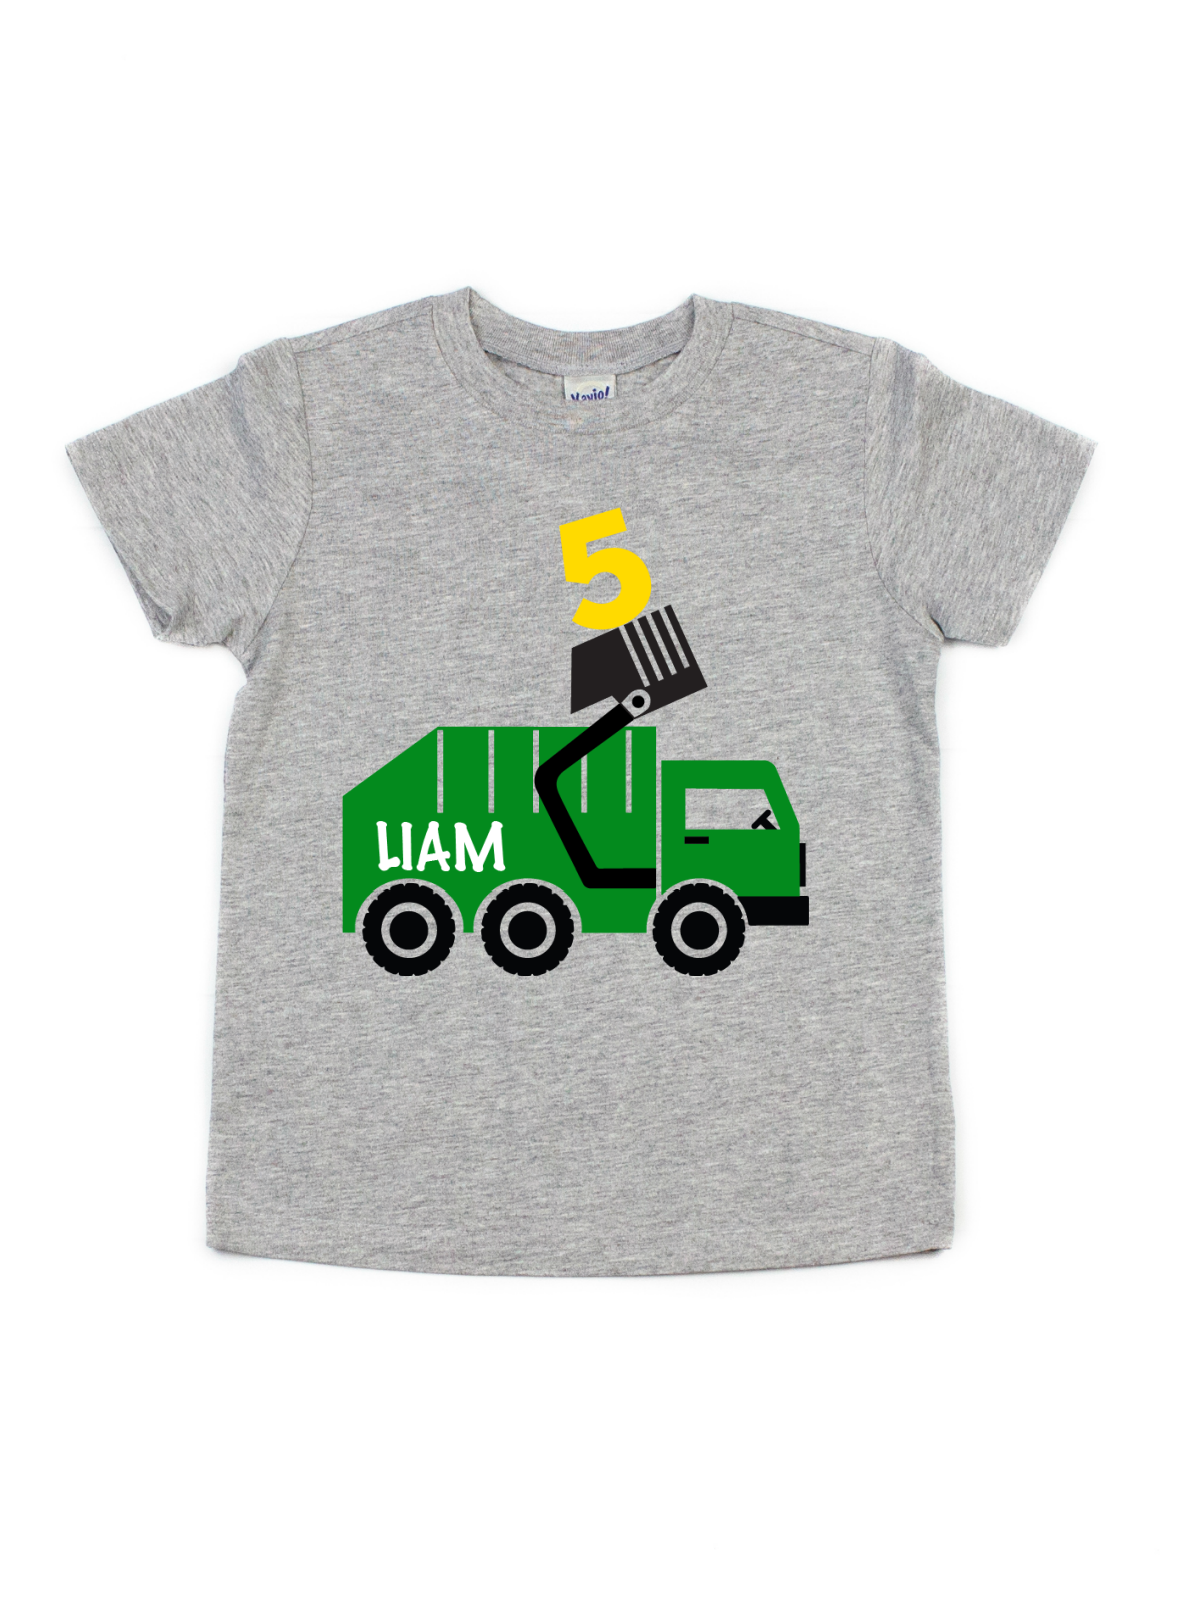 recycle truck shirt in heather gray